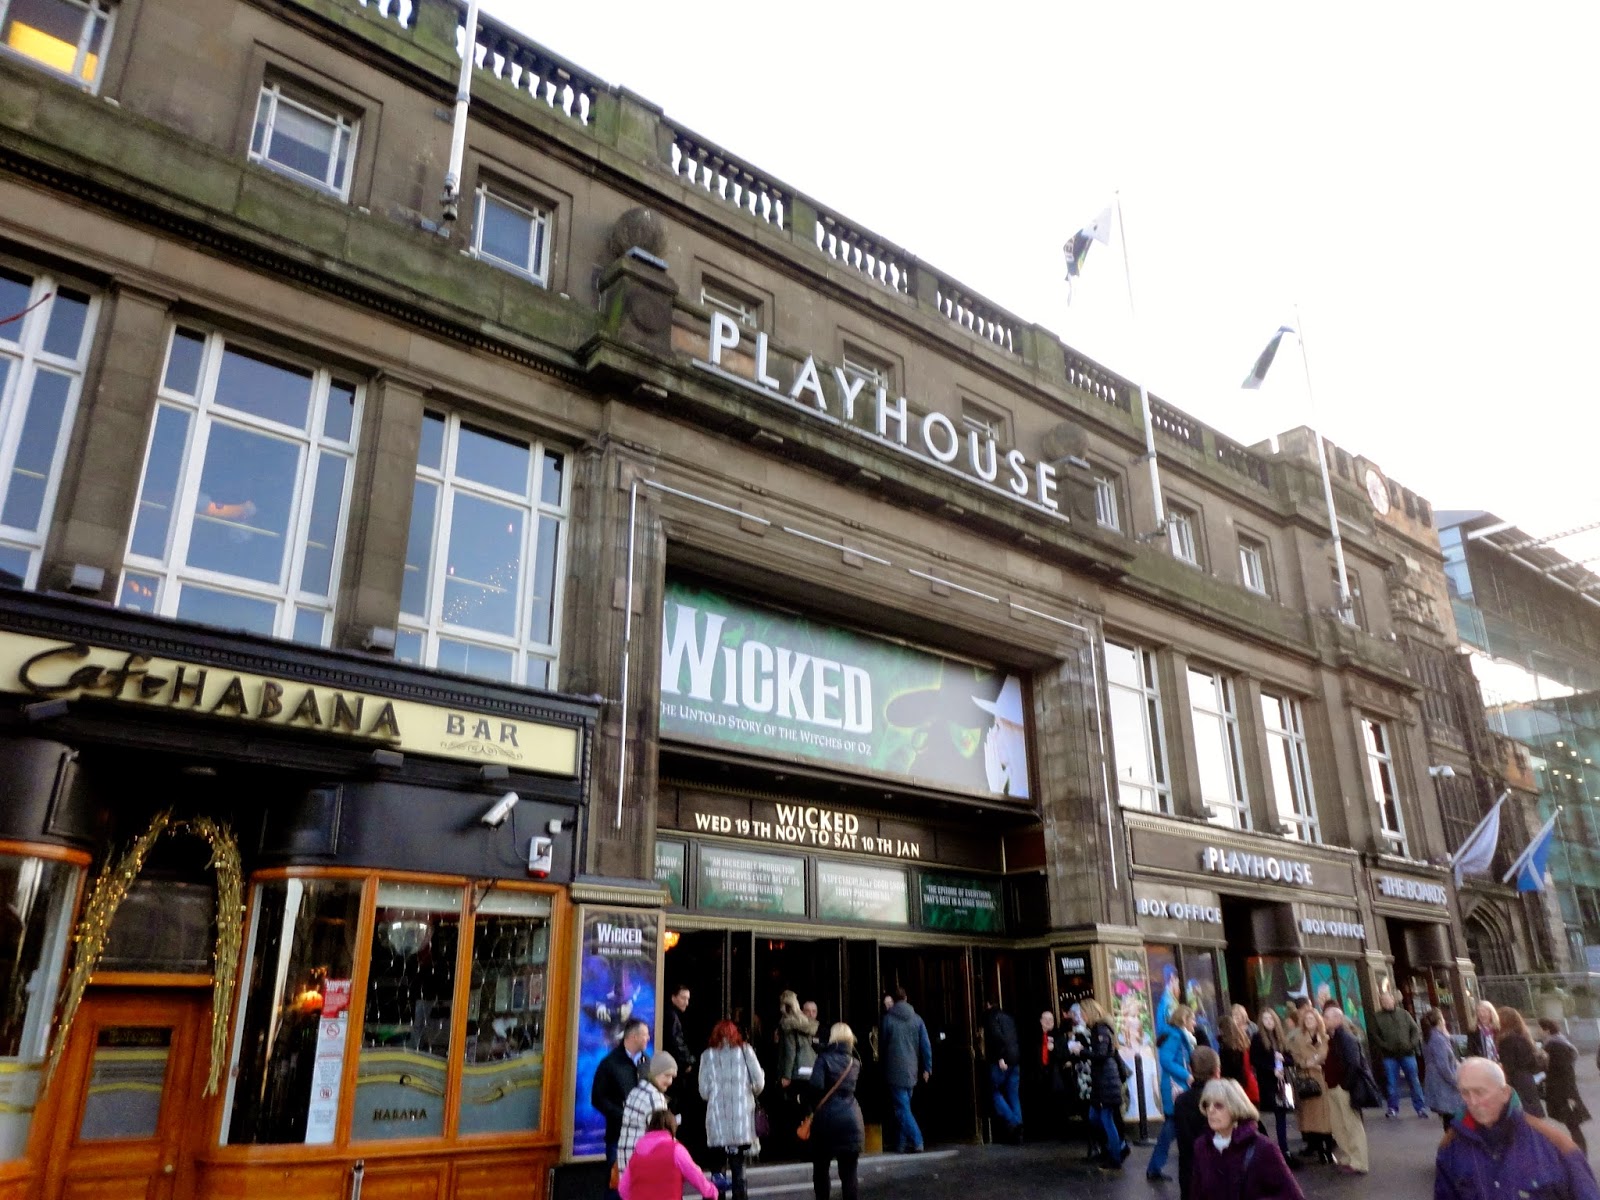 Exterior of Edinburgh Playhouse theatre, showing Wicked the Musical